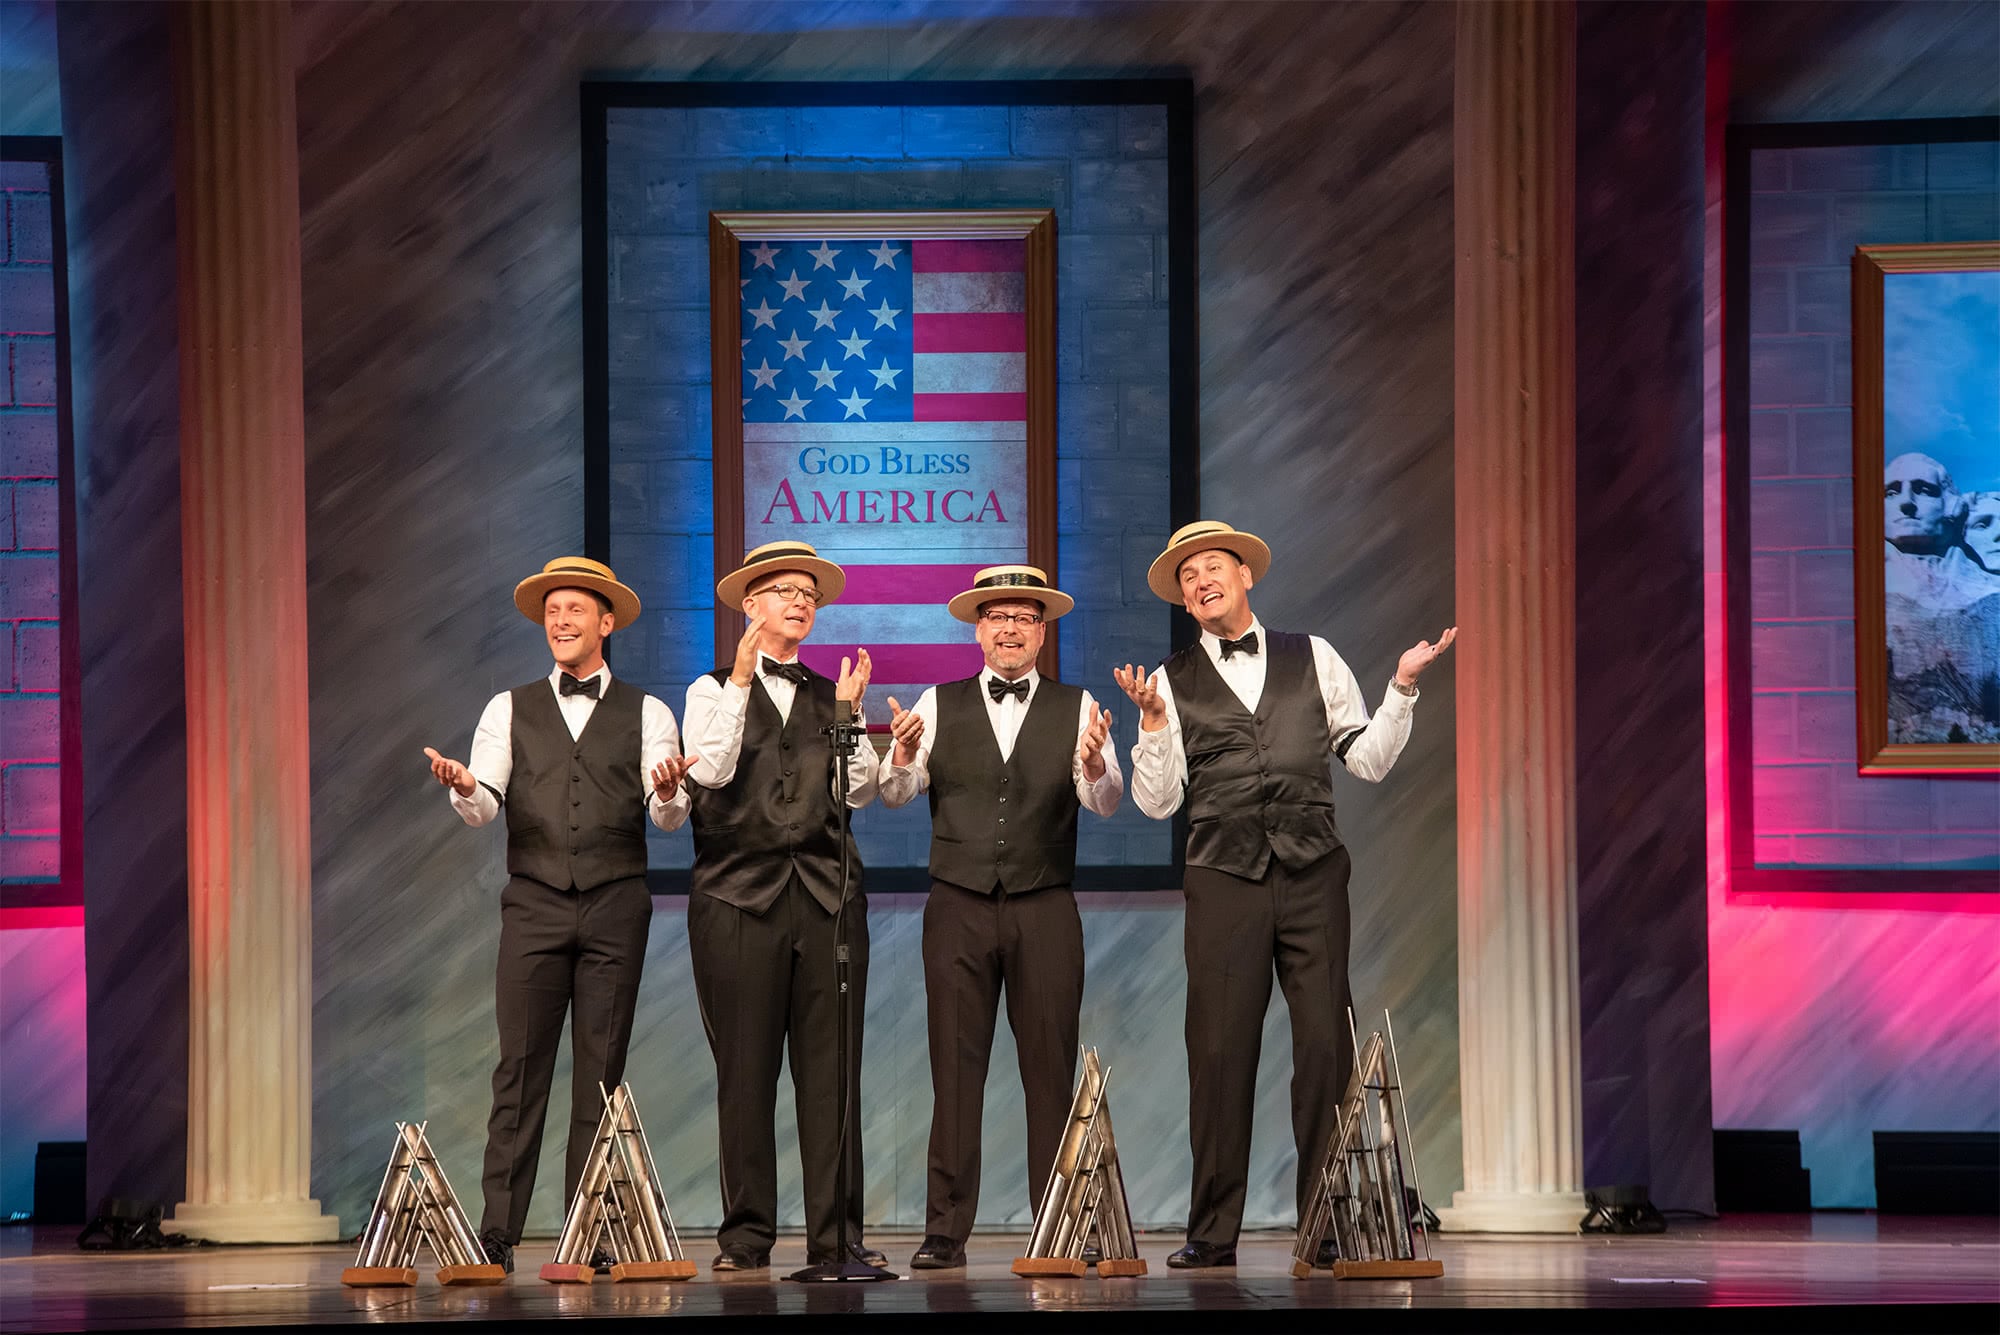 The Humdingers barbershop quartet wearing hats and vests and singing.